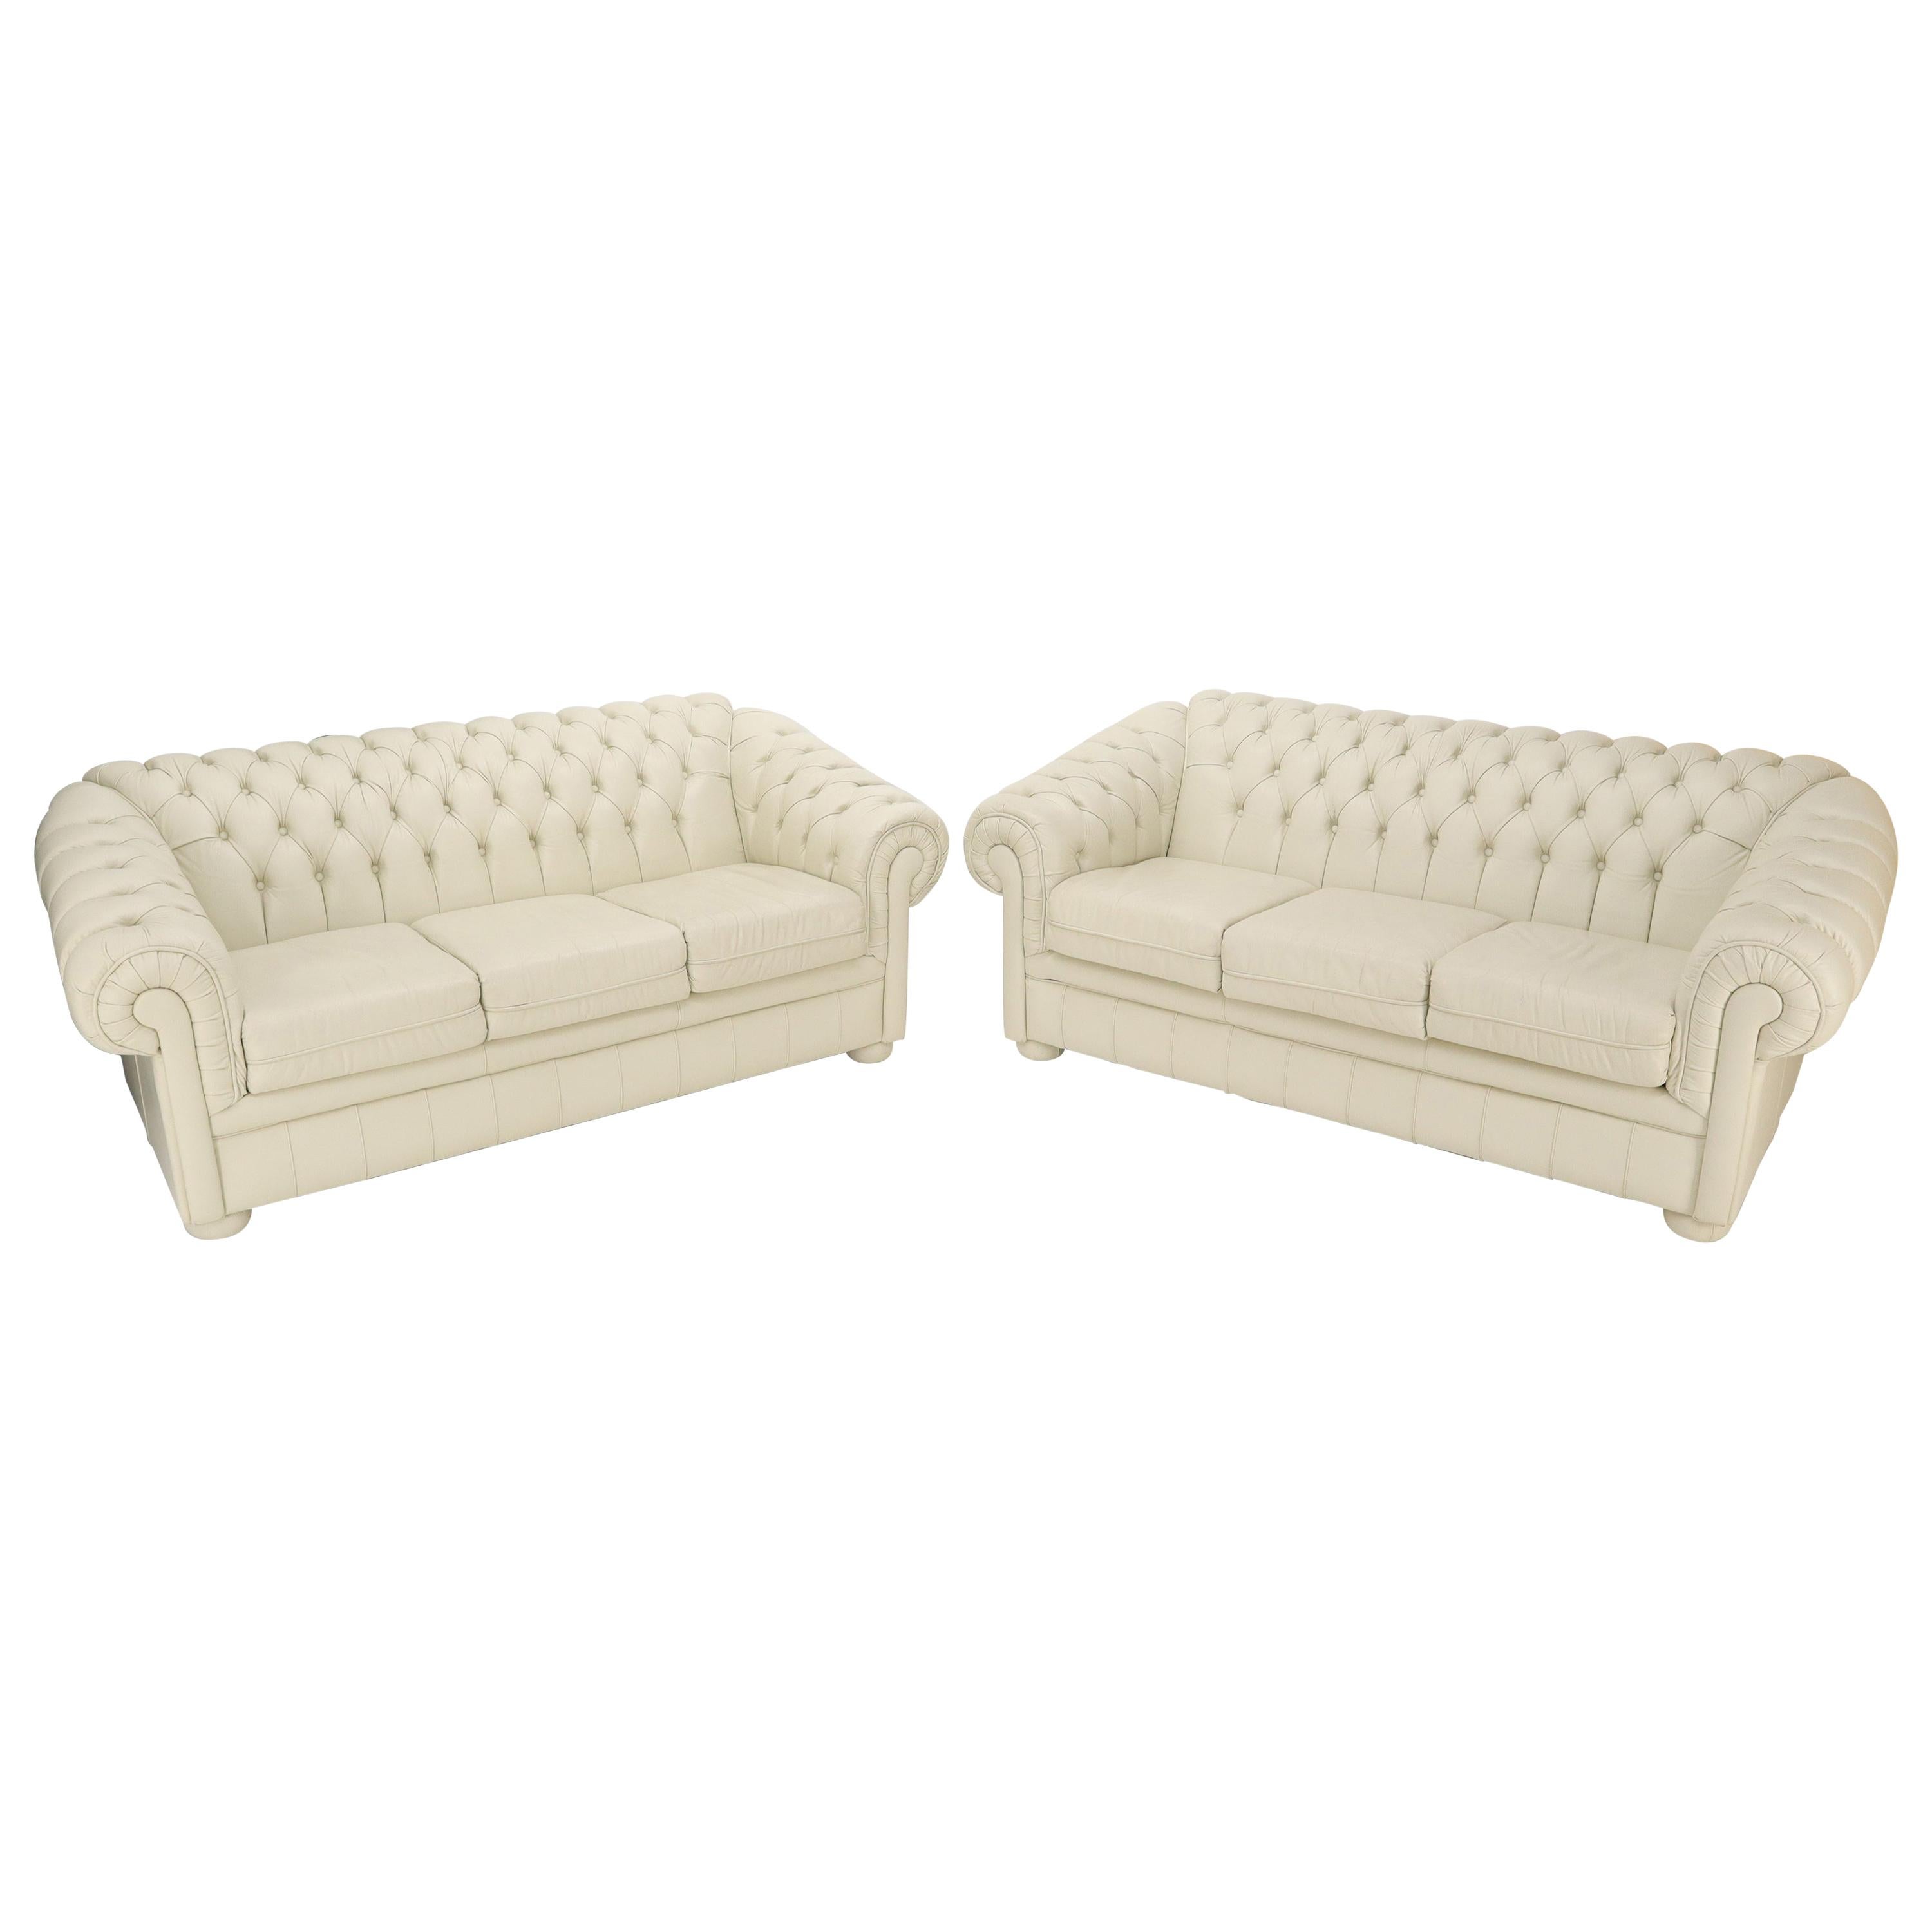 Pair of Off-White Leather Upholstery Tufted Chesterfield Sofas Couches